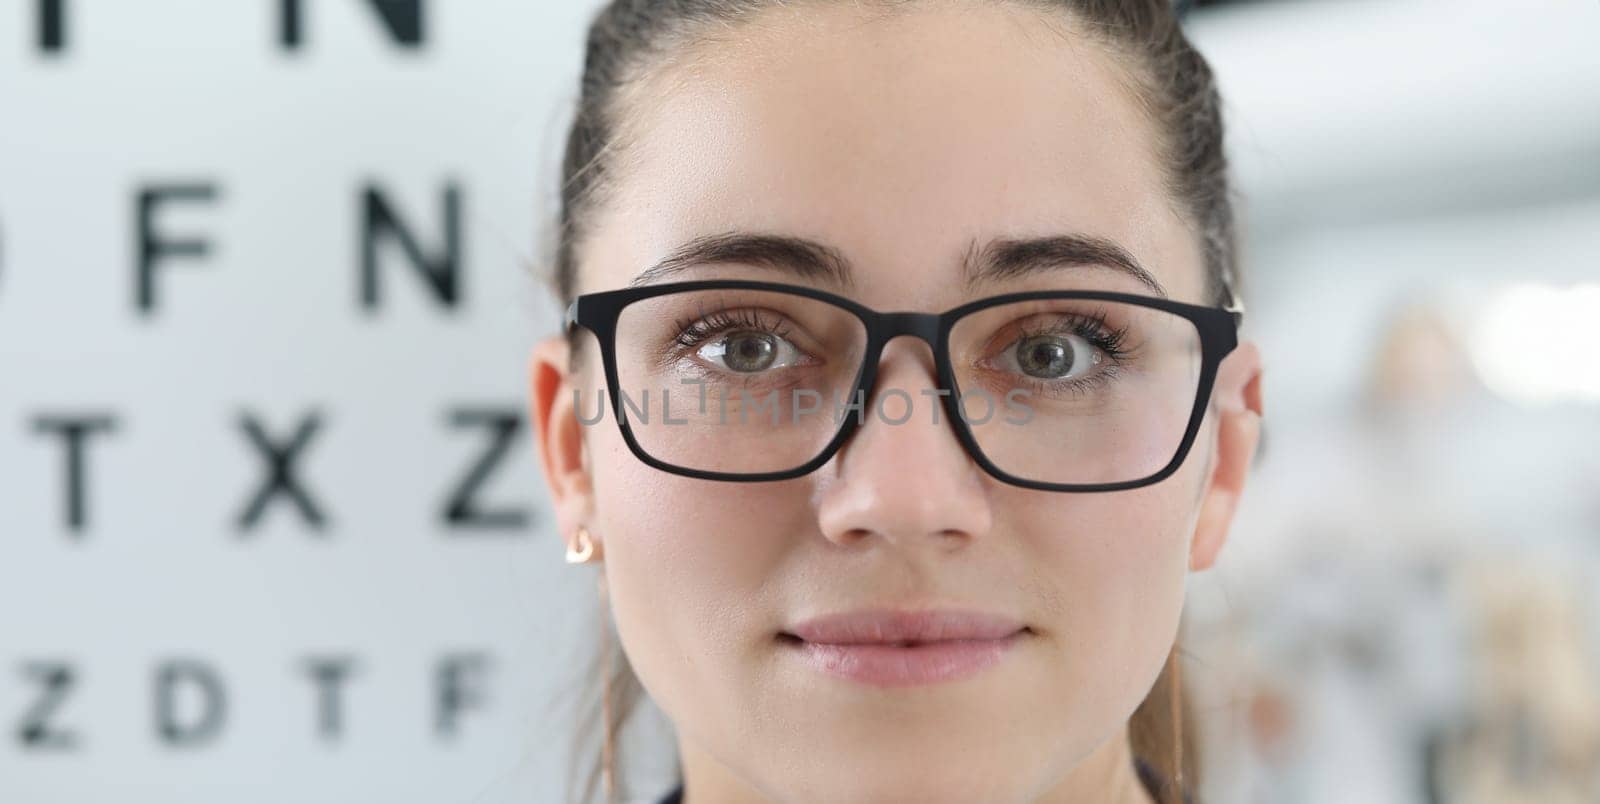 Close-up of smiling eye doctor wearing vision glasses and posing on board with letters. Checkup eyesight. Copy space in left side. Modern medicine and ophthalmologist concept